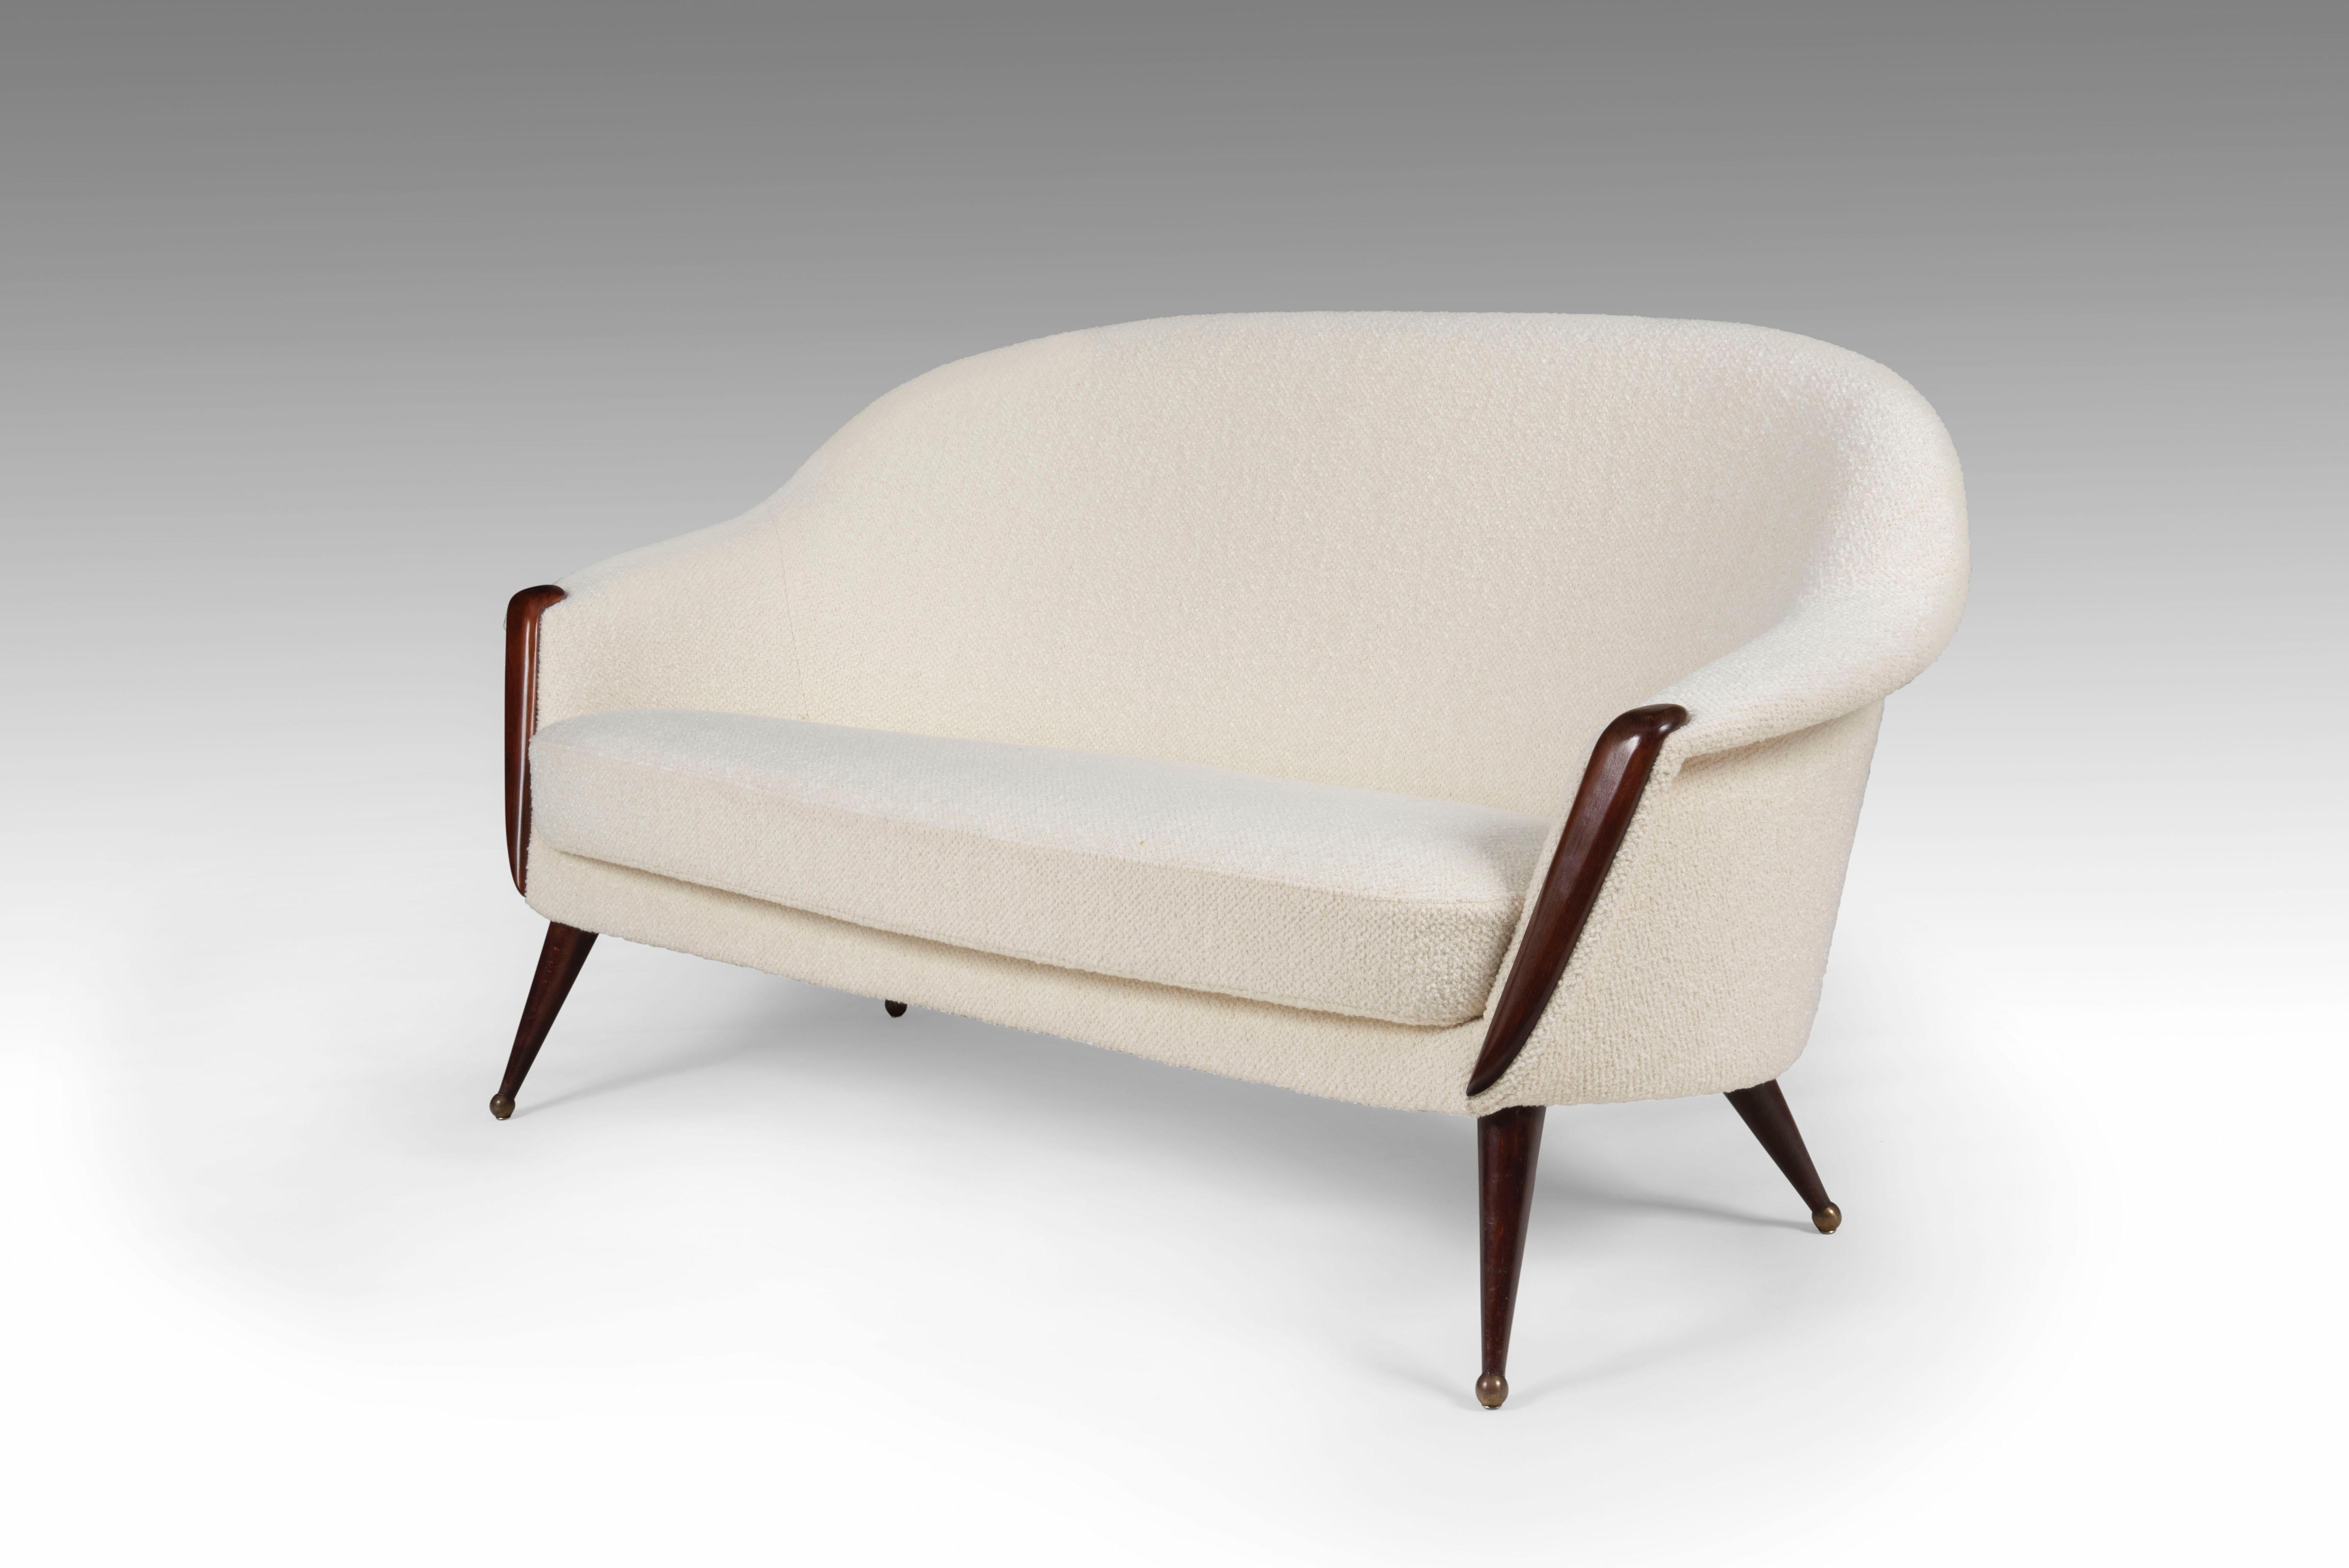 Rare model Orion wool and beechwood sofa with brass details by Folke Jansson. 
Firm yet comfortable. 

Produced by SM Wincrantz in Sweden in 1950's. 

Reupholstered in wool bouclé.